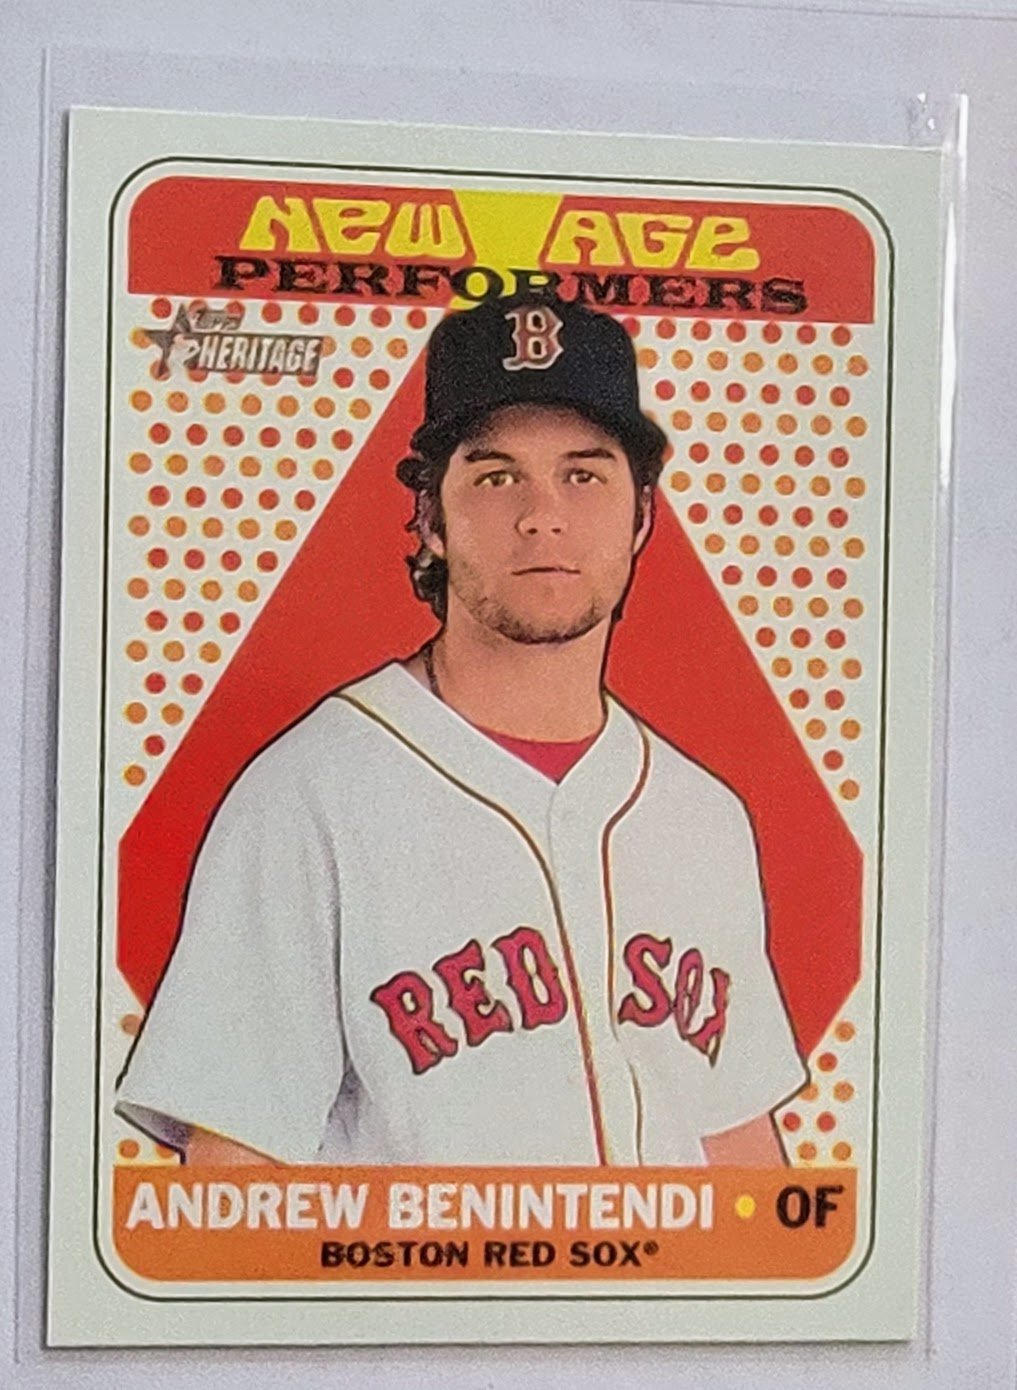 2018 Topps Heritage Andrew Benitendi New Age Performers Insert Baseball Card TPTV simple Xclusive Collectibles   